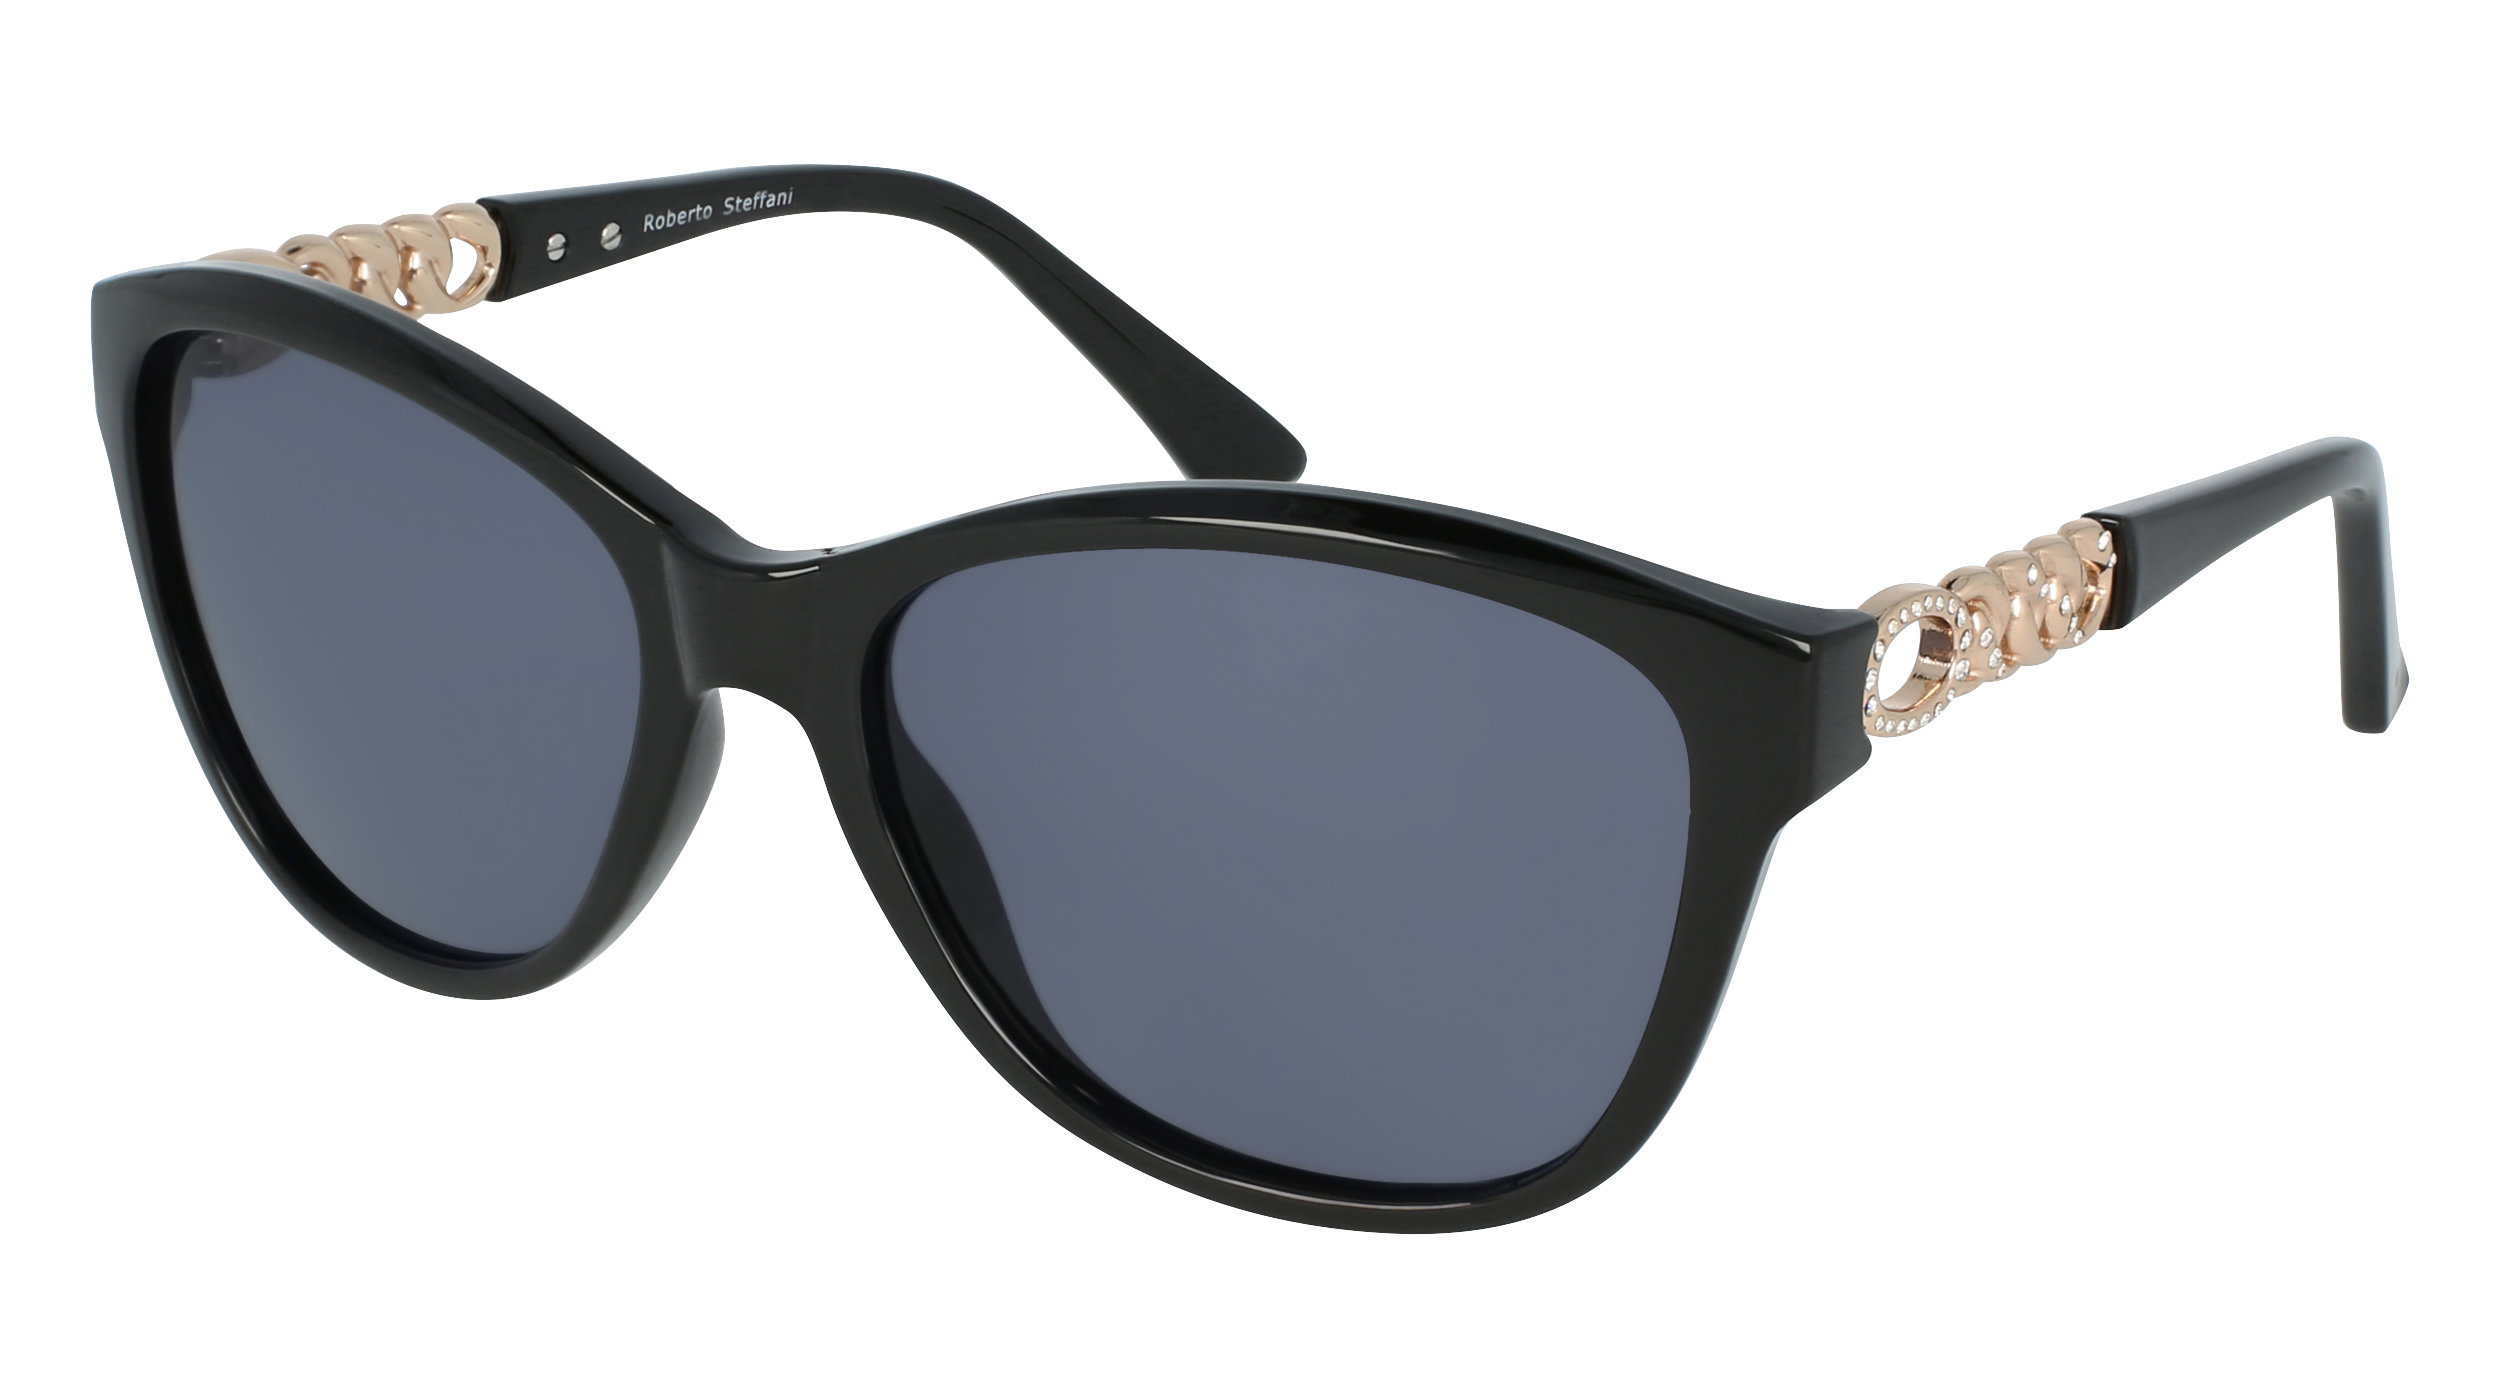 R RS 161/S women's sunglasses (from the side)